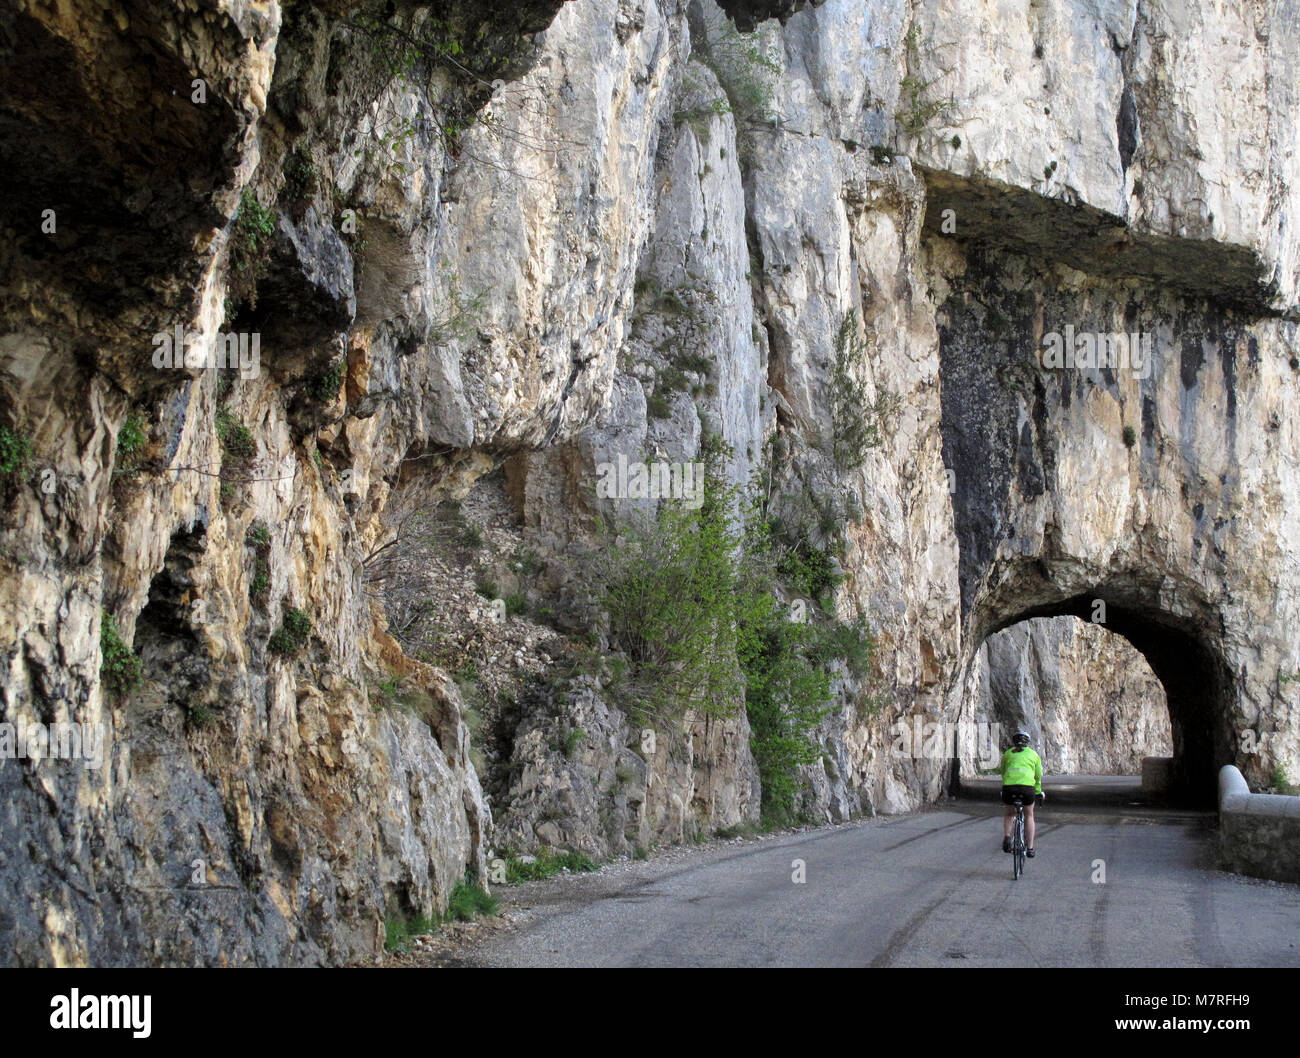 A cyclist approaches a tunnel on the road forming the Cirque de Combe Laval in the Vercors region of the French Alps Stock Photo